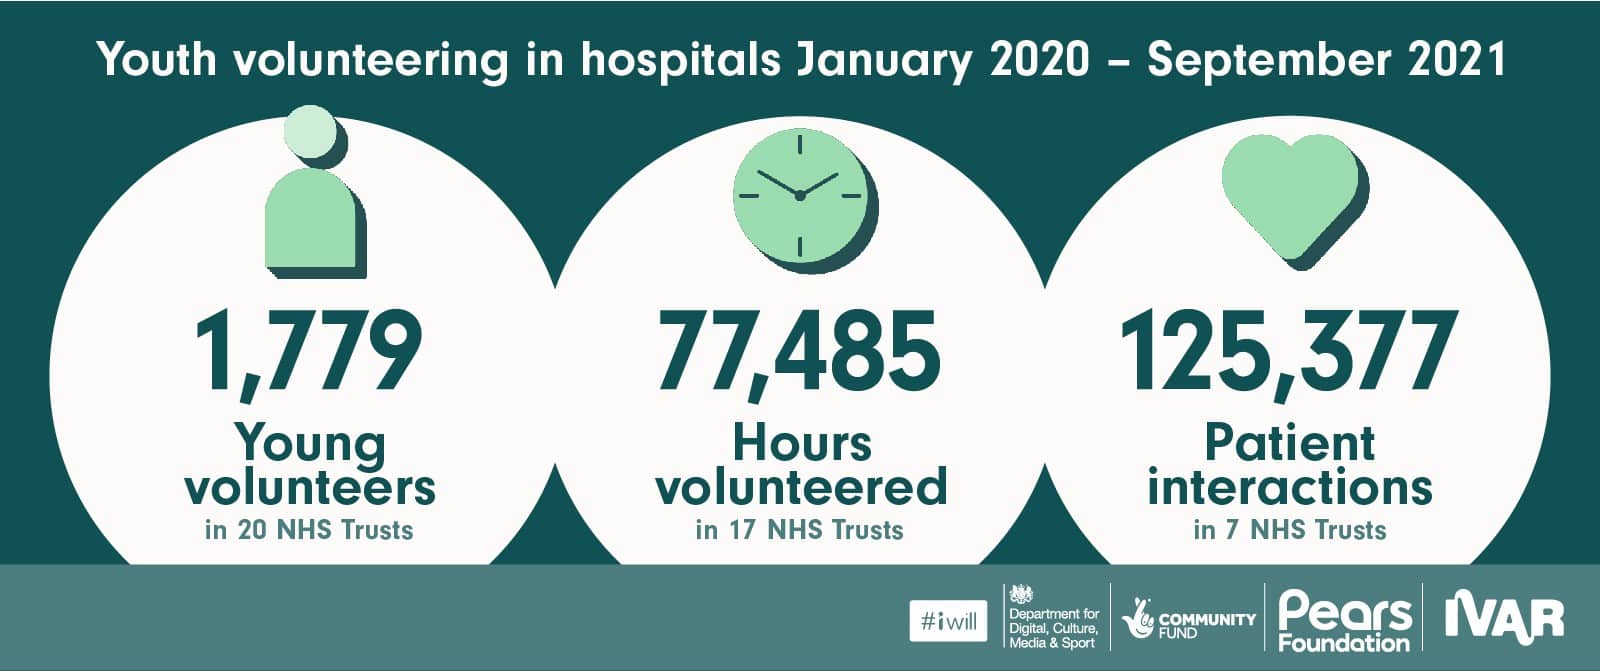 An infographic of youth volunteering in NHS. 